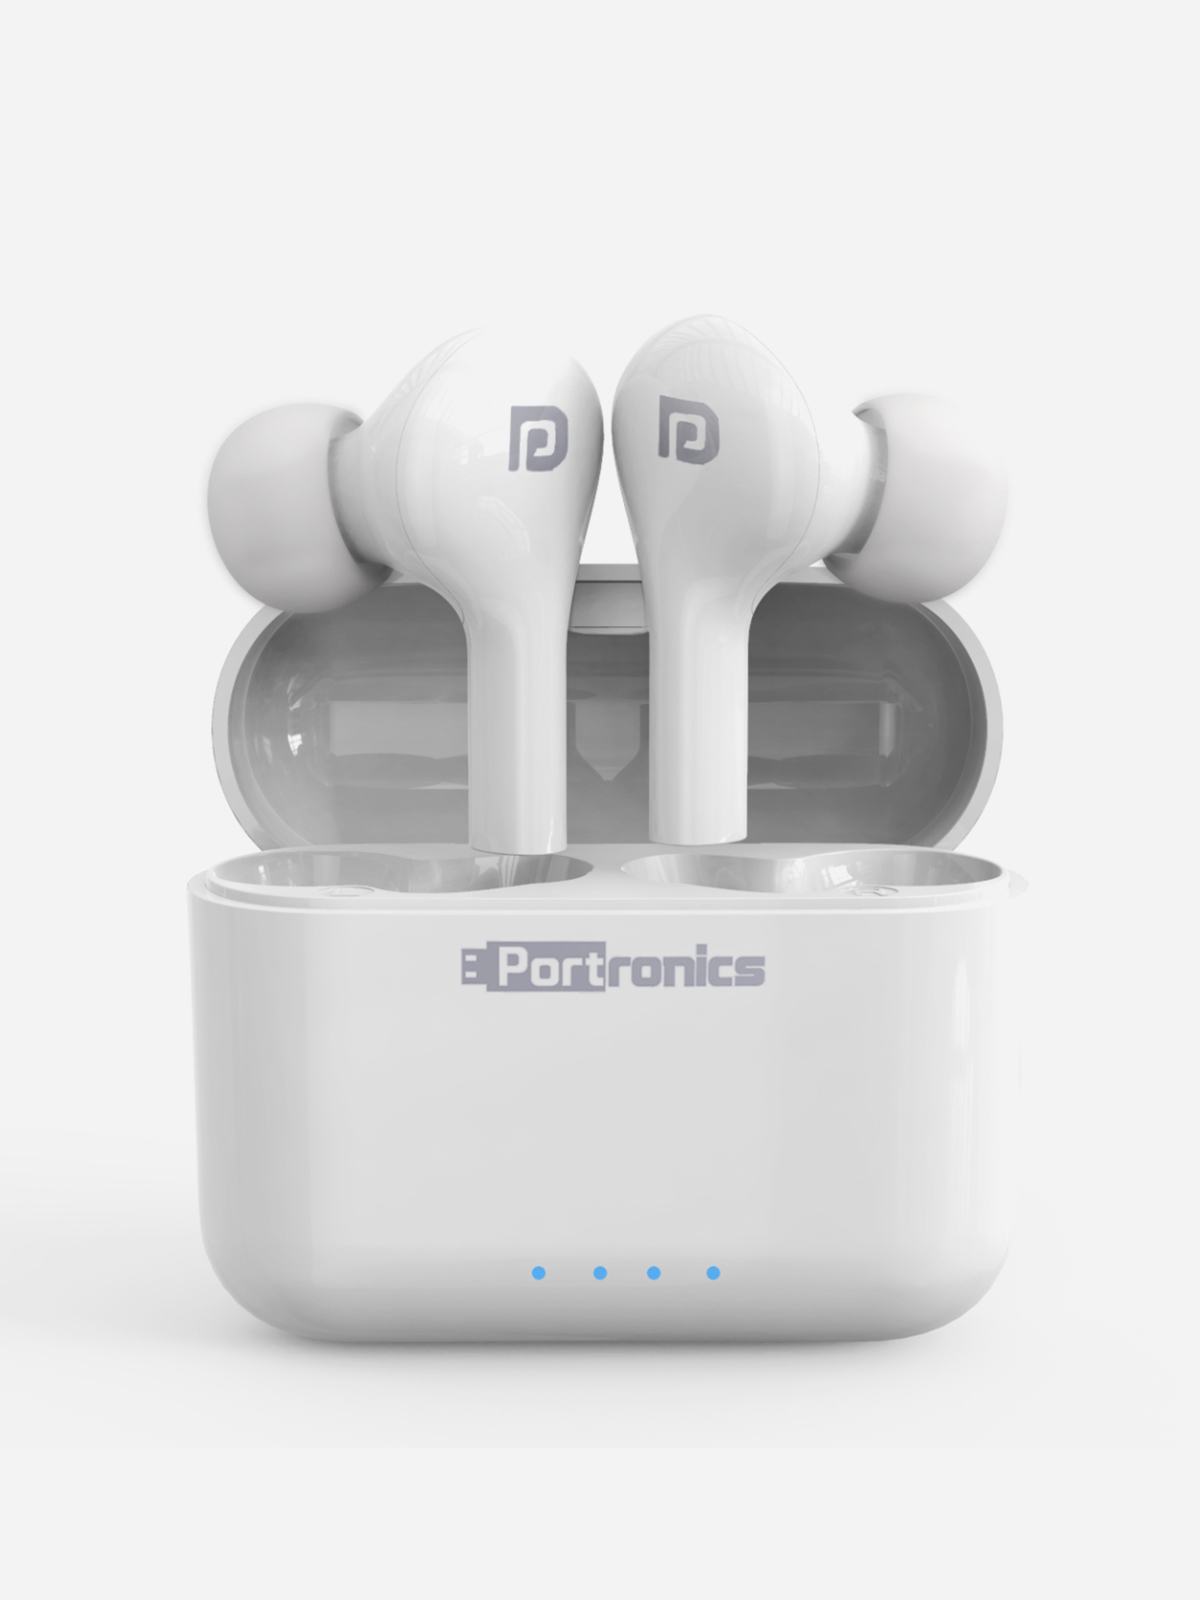 Portronics - White Harmonics Twins 33 Smart TWS Earbuds With Bluetooth 5.0 & In-Built Mic